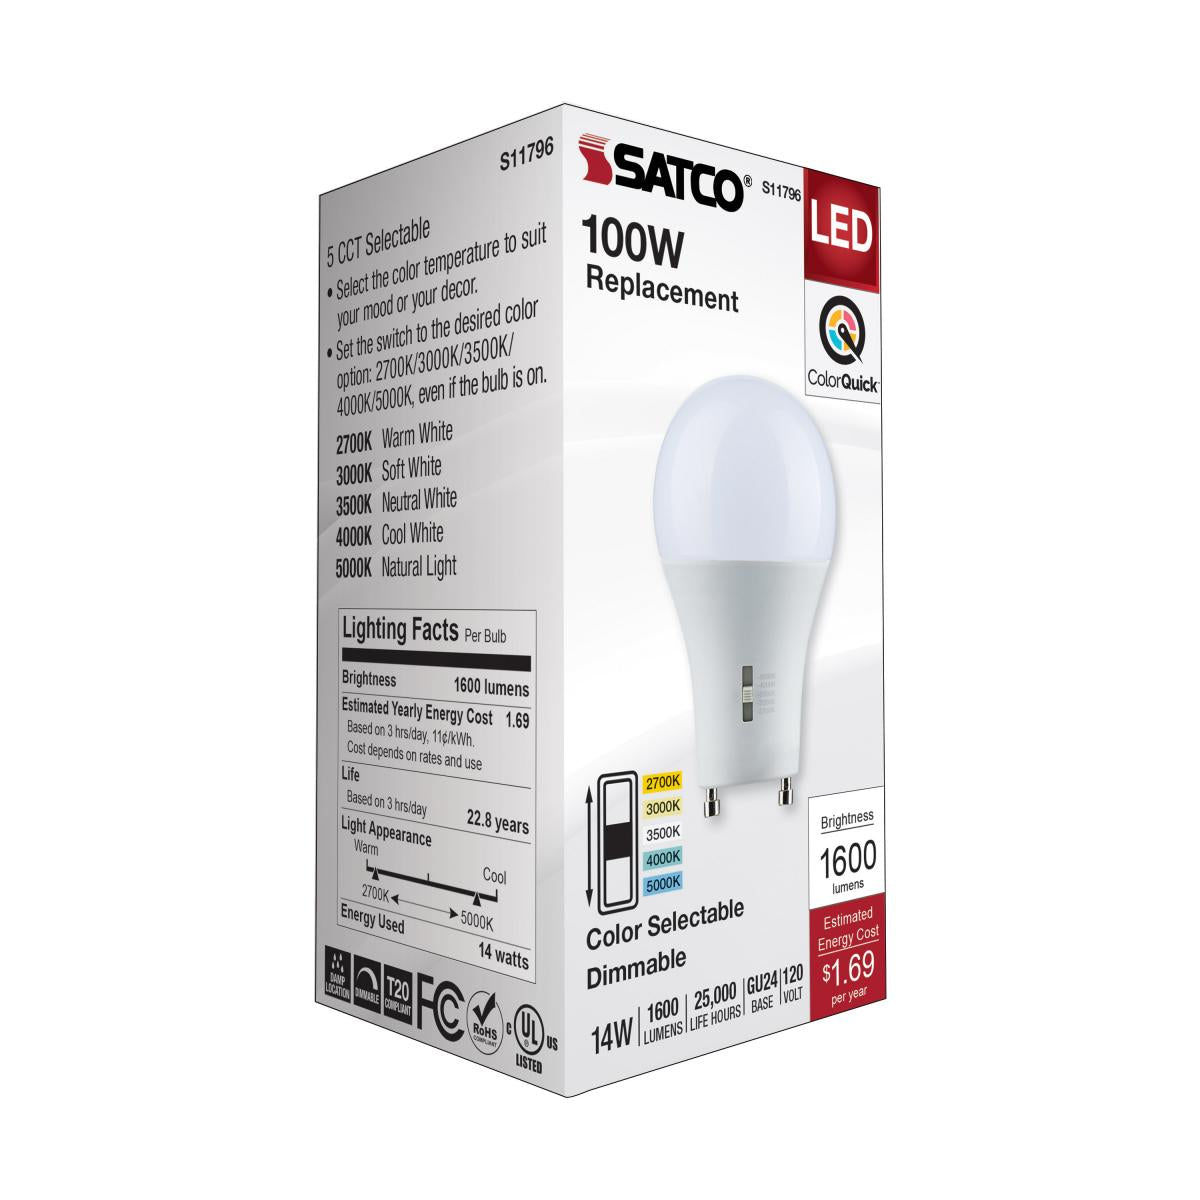 A19 LED Bulb, 100W Equivalent, 14 Watt, 1600 Lumens, Selectable CCT 2700K to 5000K, GU24 Base, Frosted Finish - Bees Lighting